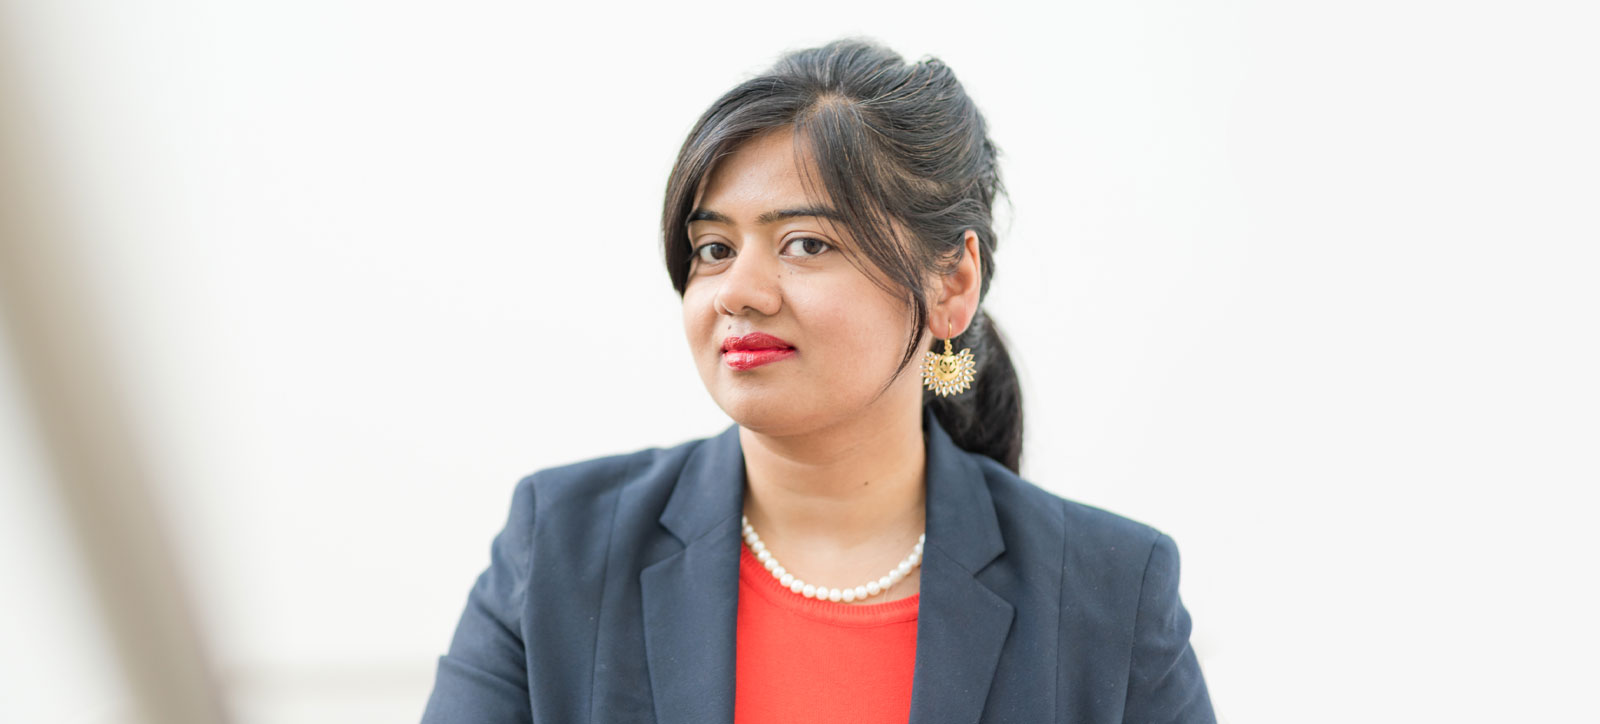 Dr Shweta Singh from Warwick Business School, who has been chosen as UN delegate for the 68th Commission on the Status of Women